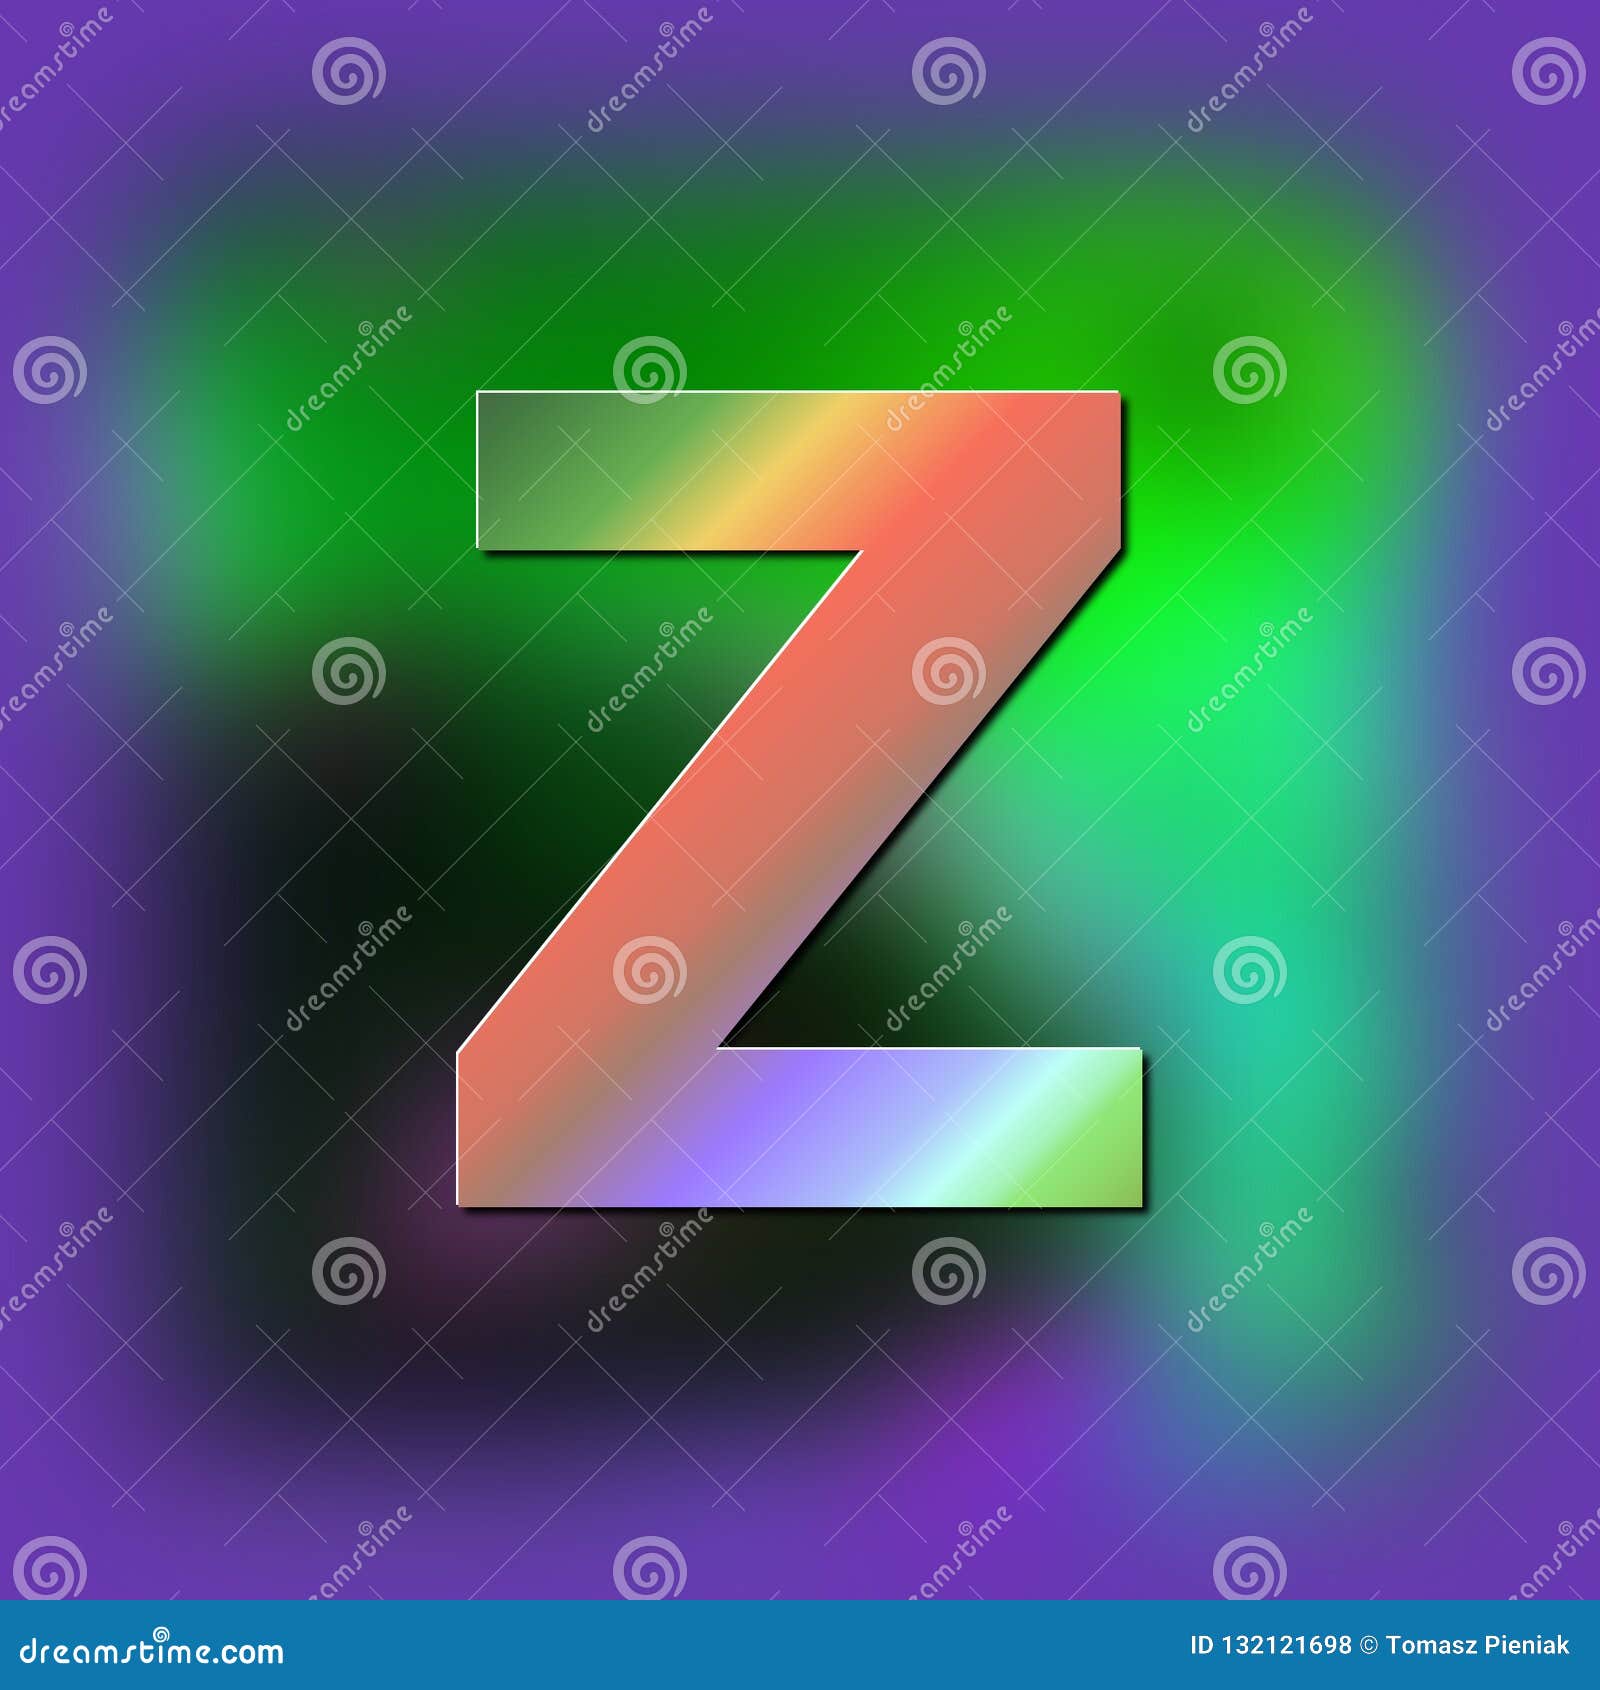 The Letter Z is Placed on the Texture Stock Illustration - Illustration ...